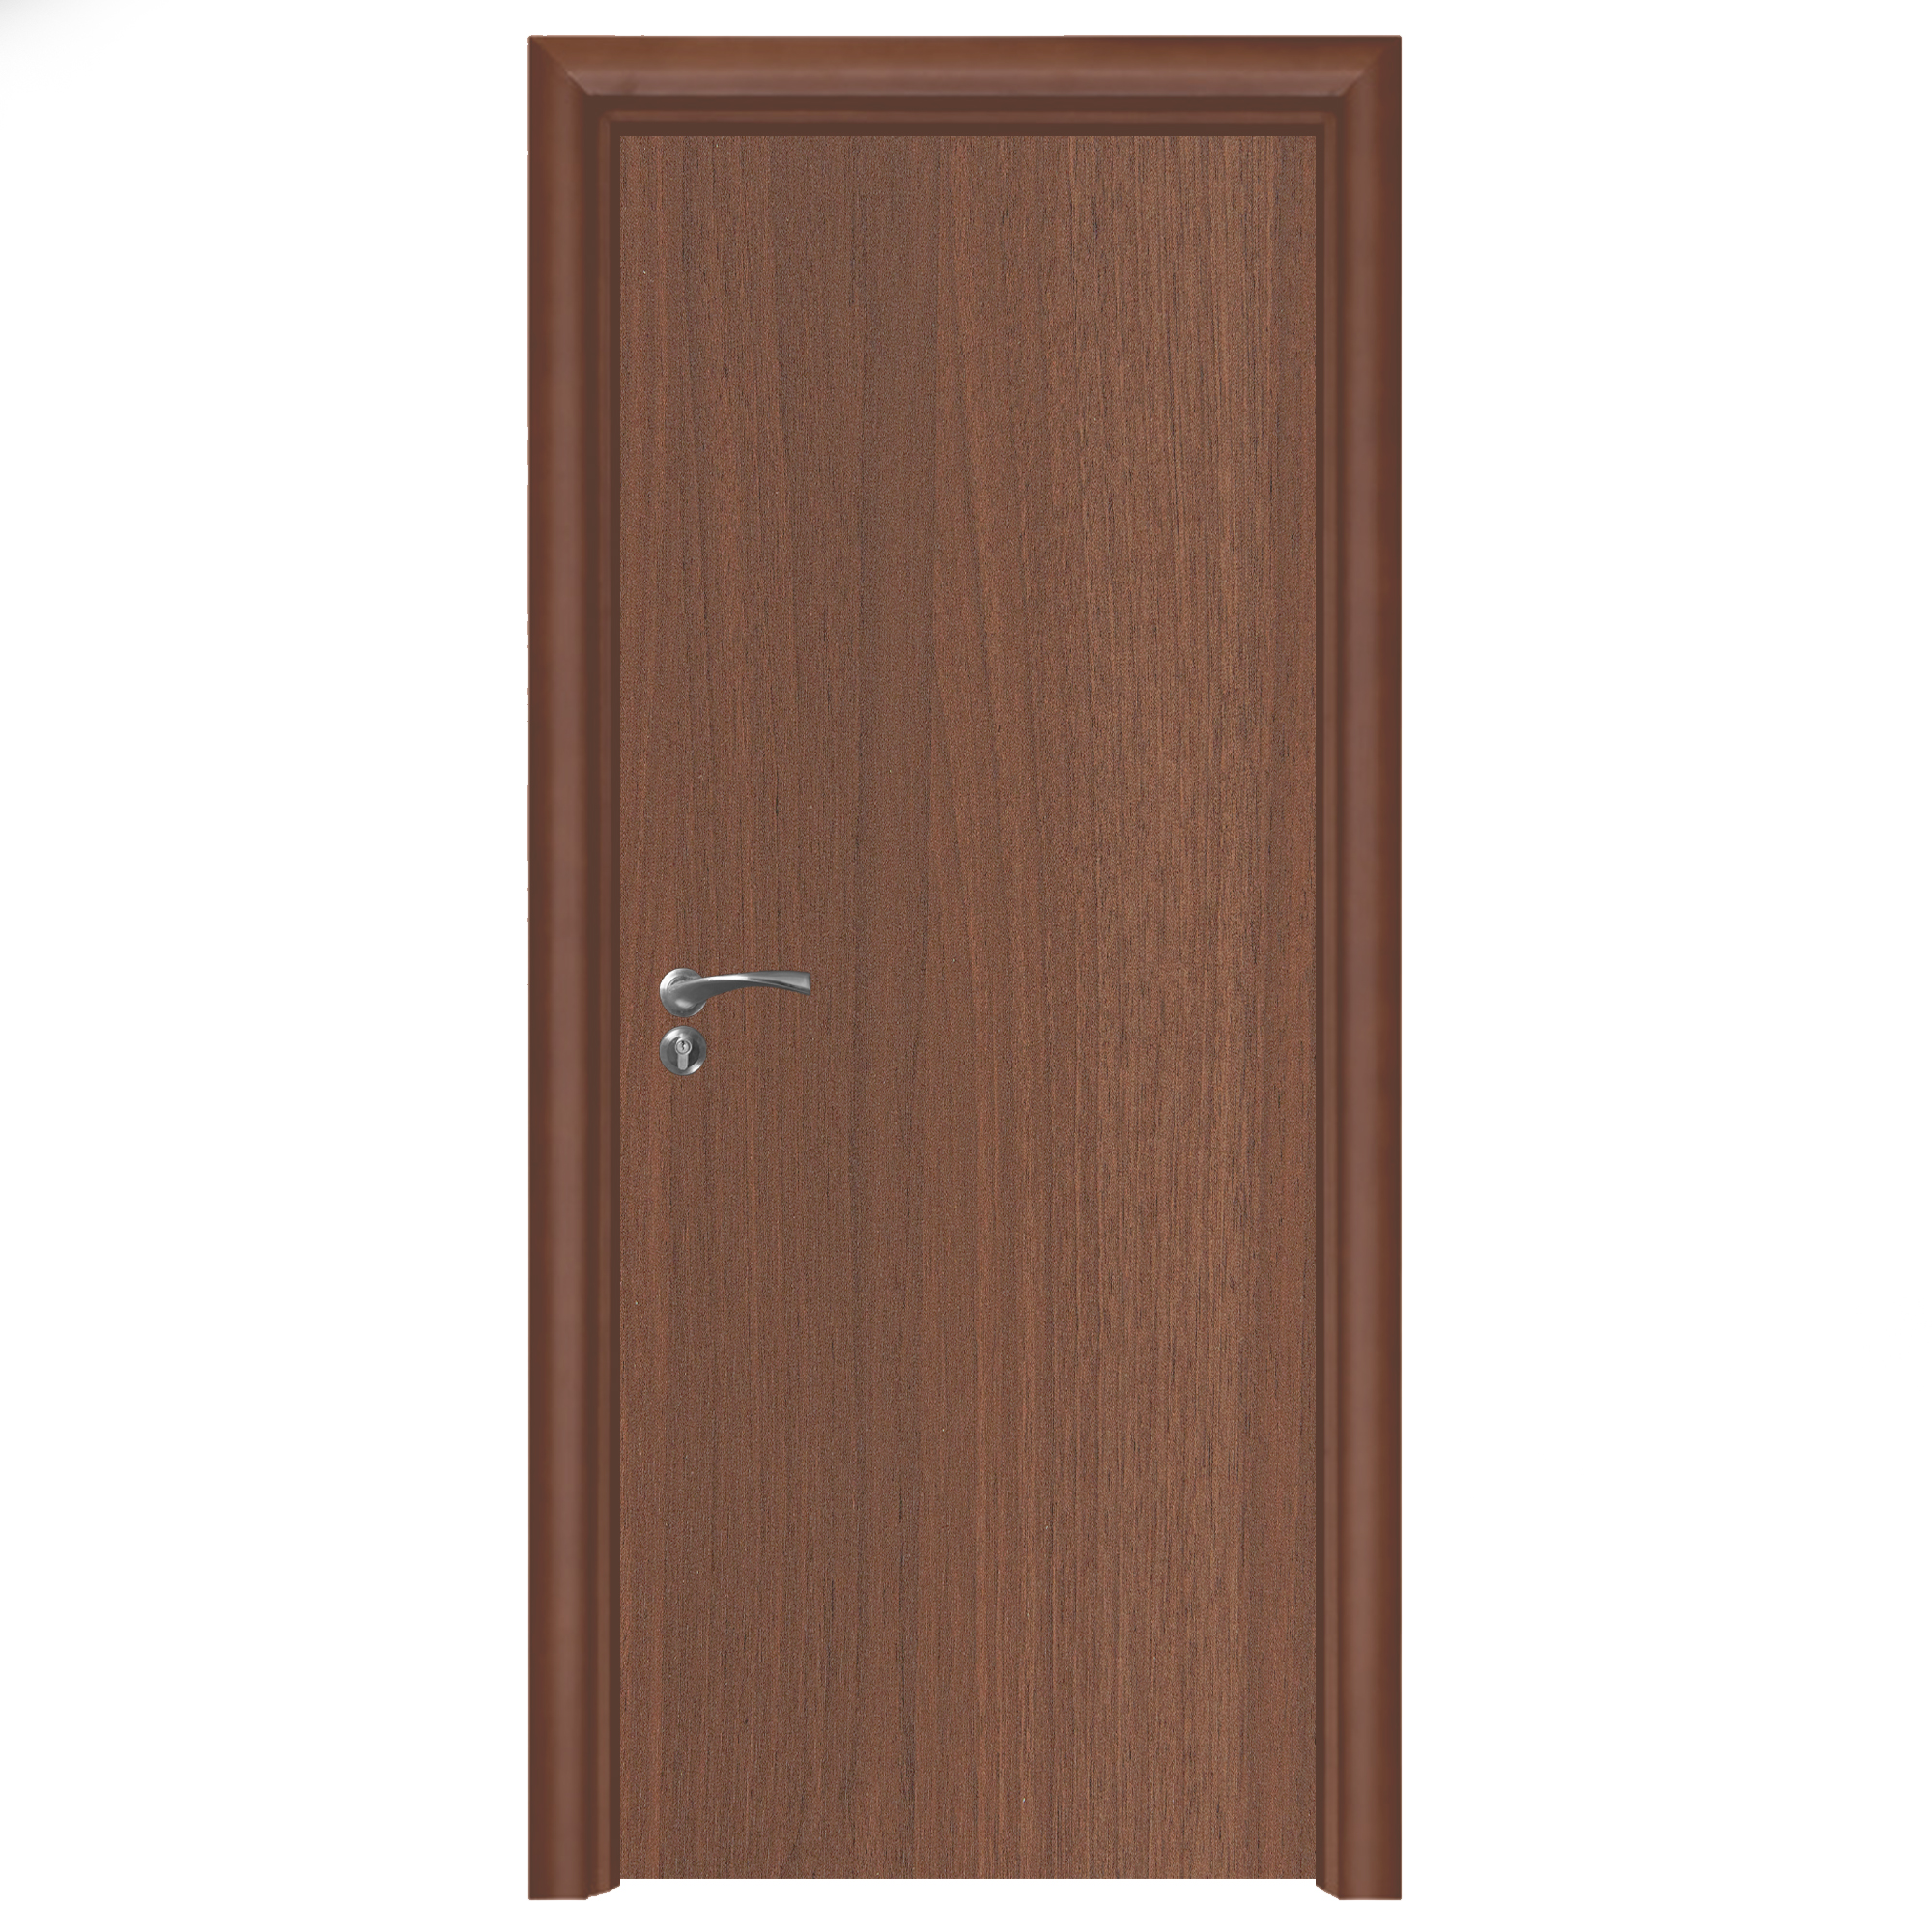 Plain MDF Door for your room - EH2015SD - Brown Color